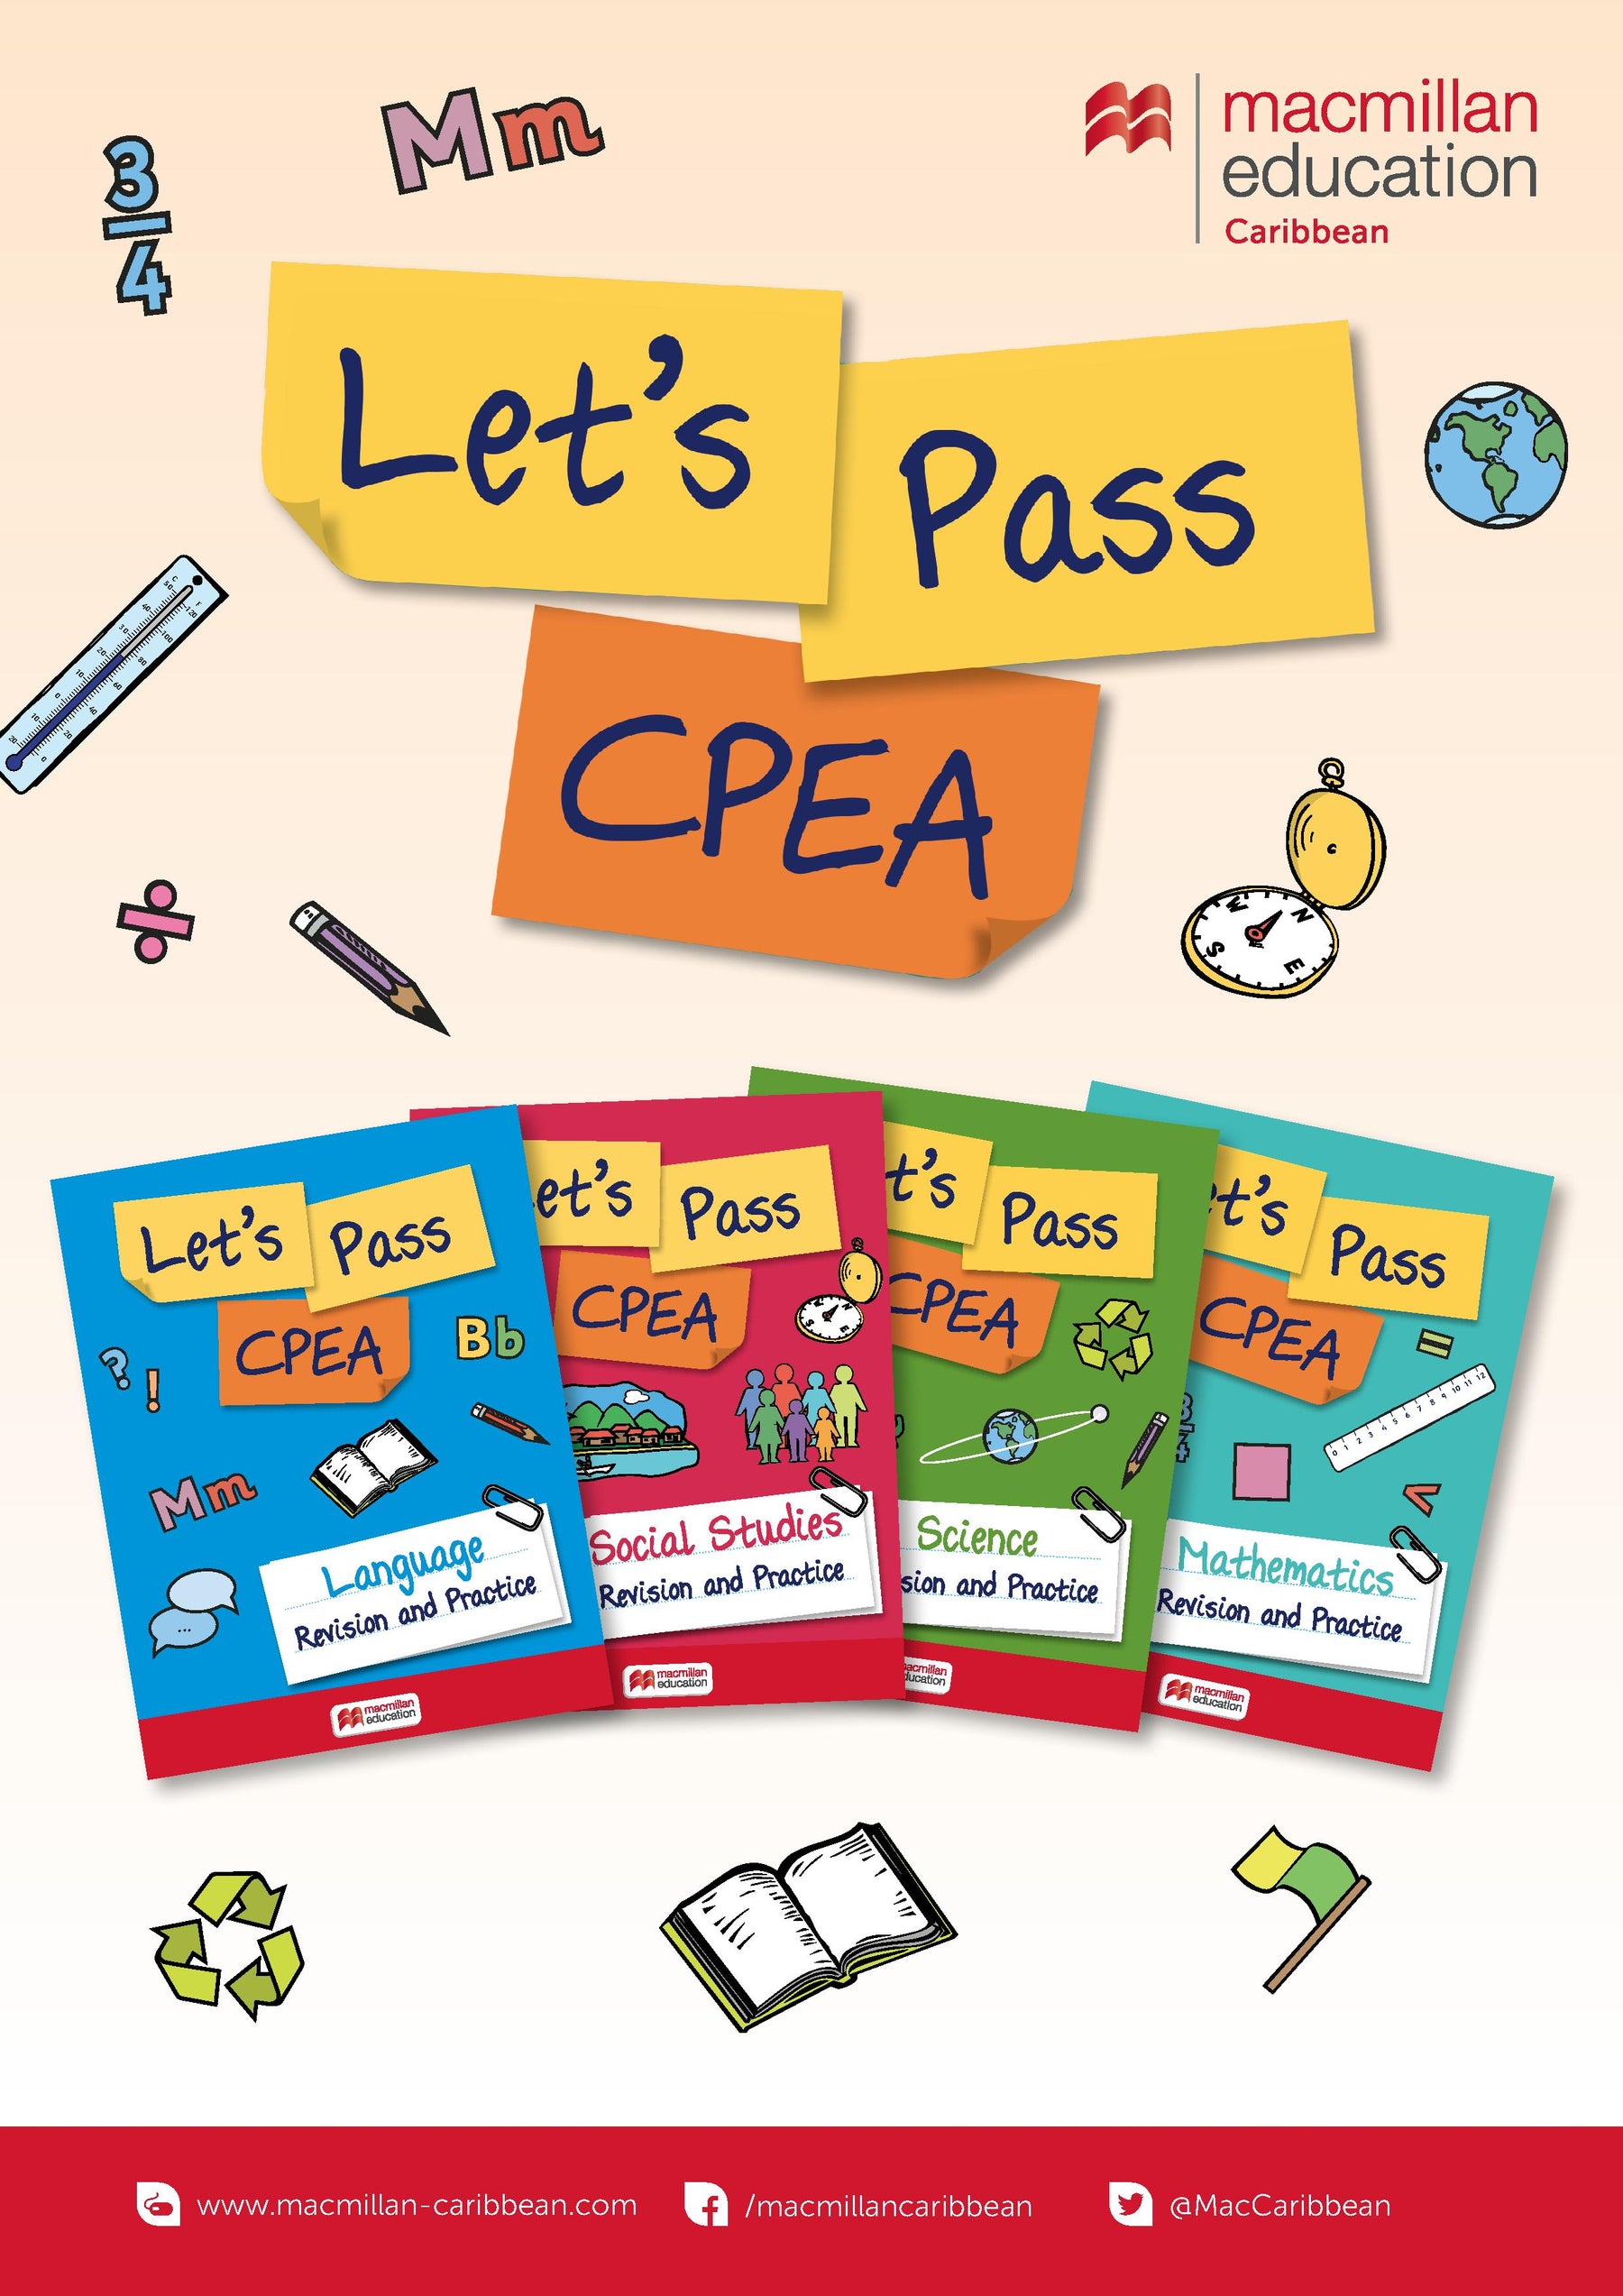 Introducing: Let's Pass CPEA!